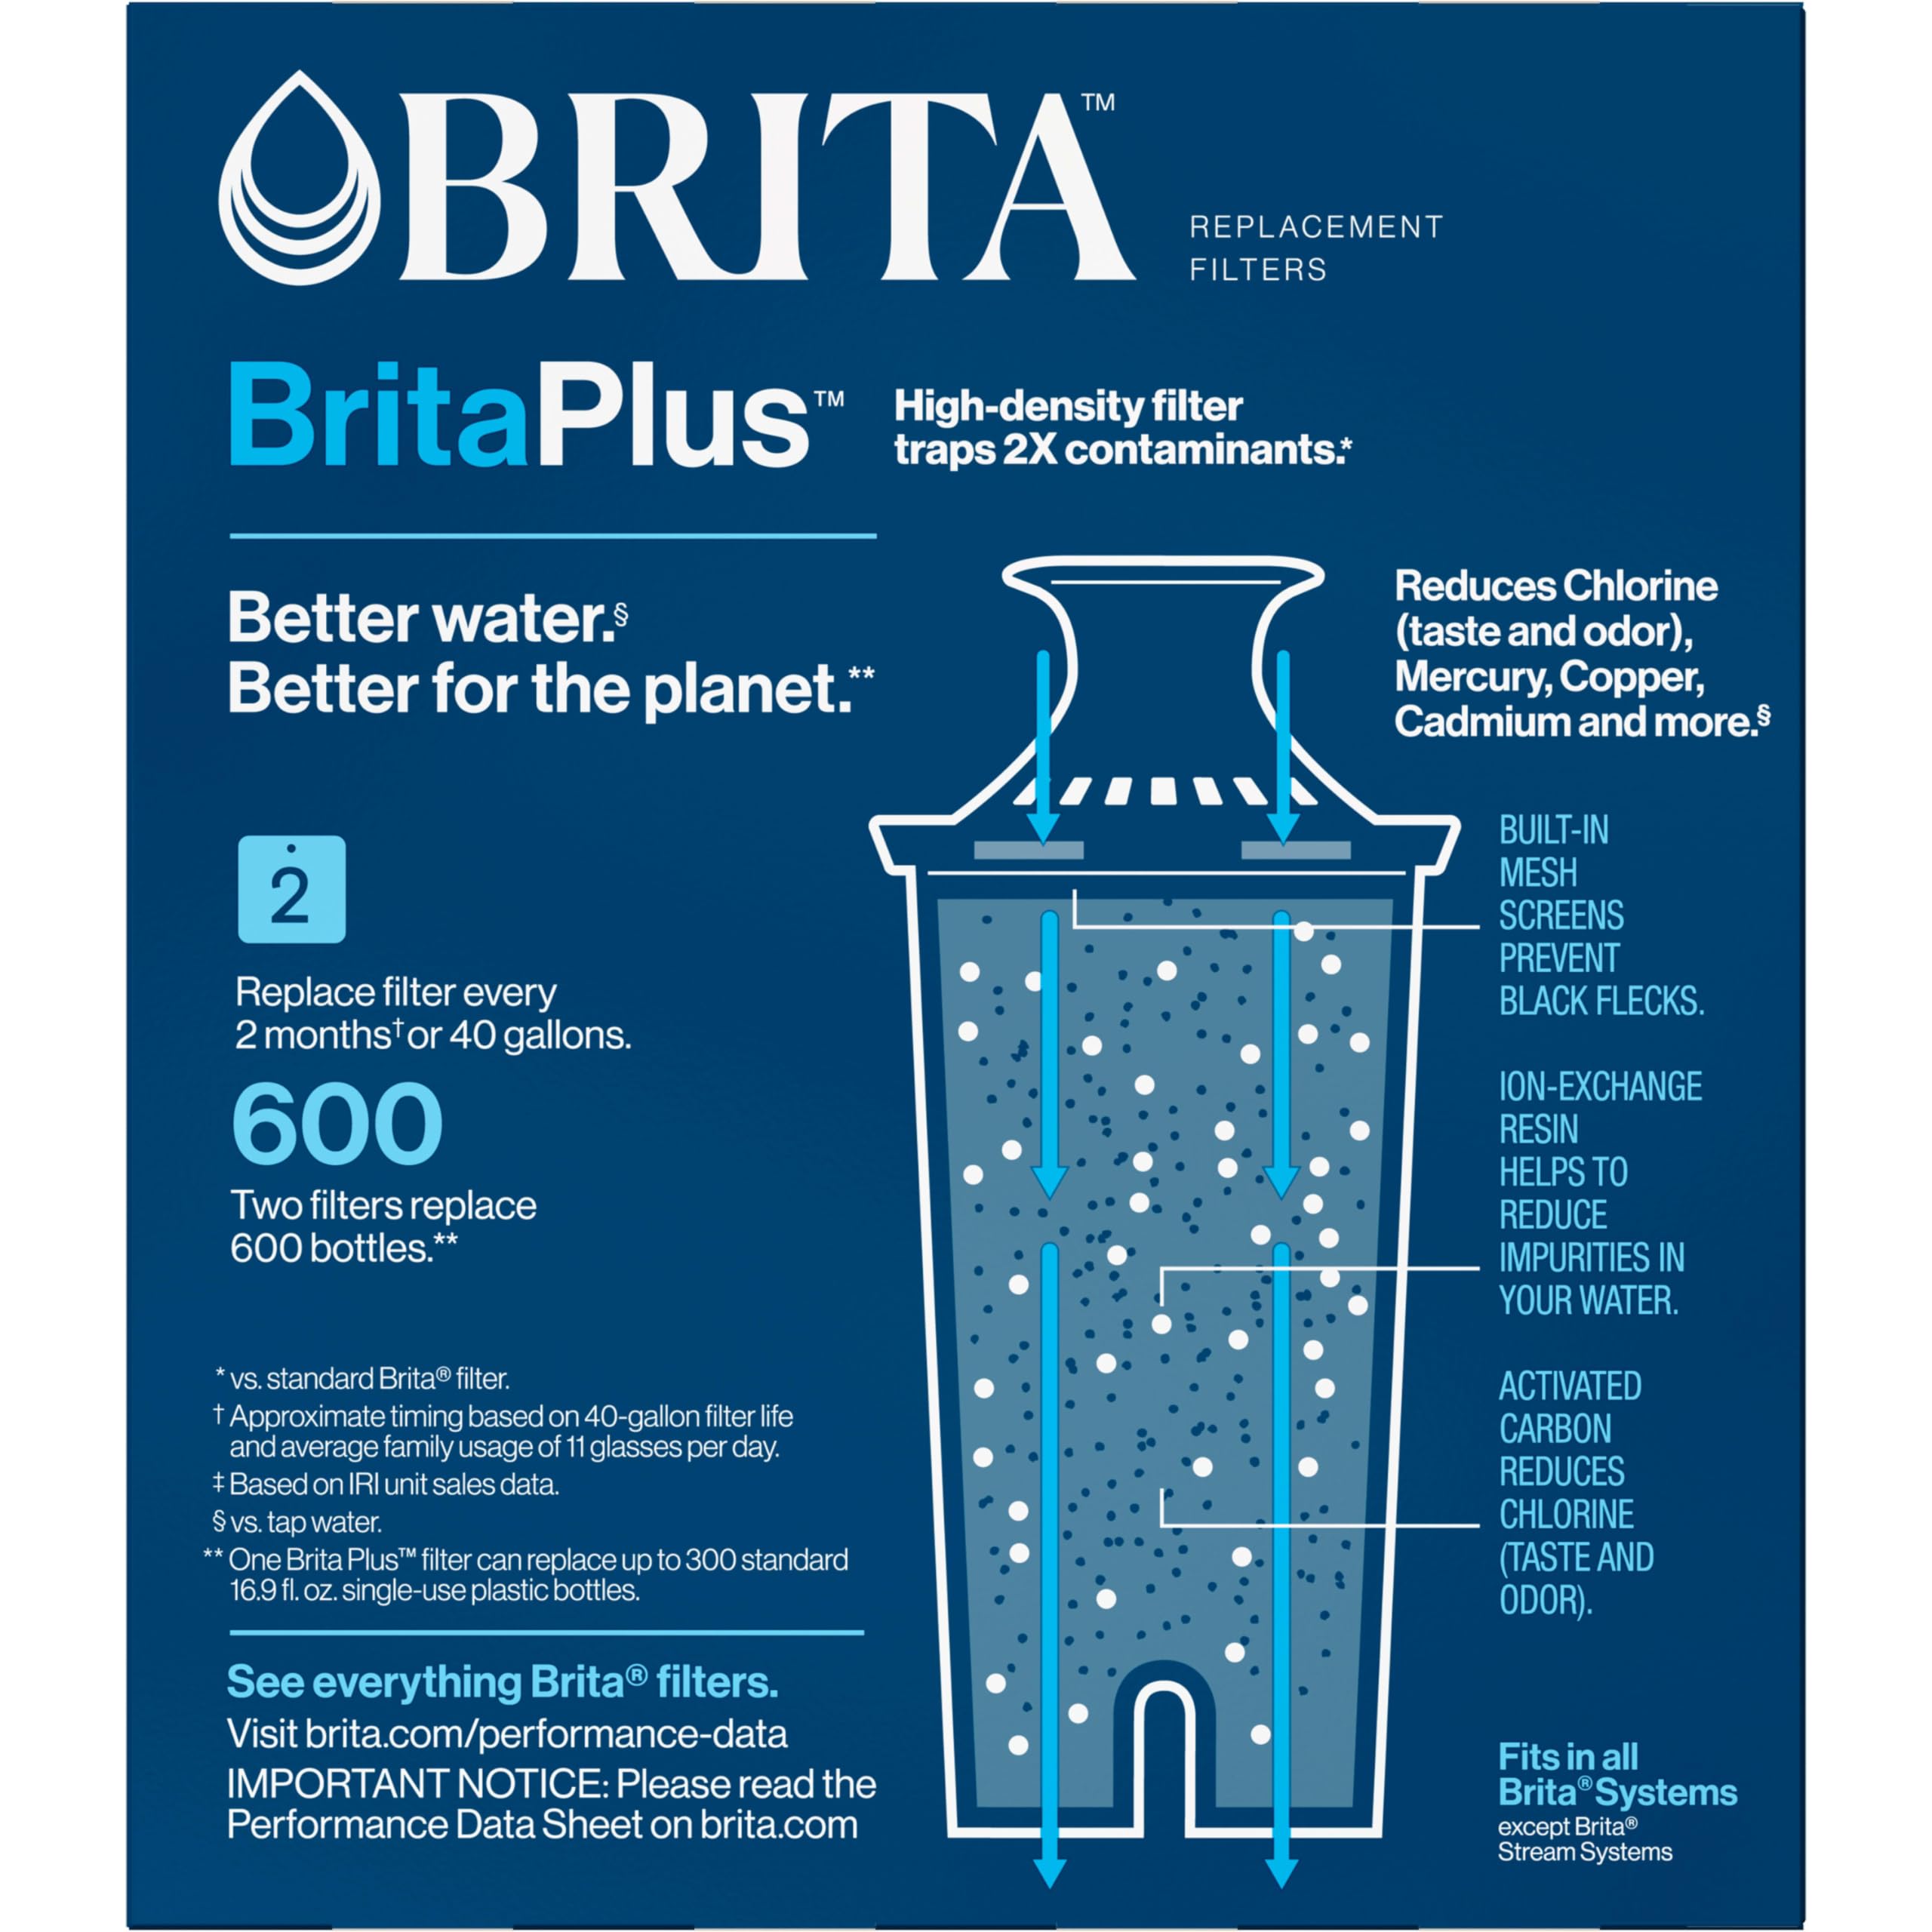 Brita Plus Water Filter, High Density Replacement Filter for Pitchers and Dispensers, Reduces 2x Contaminants*, Lasts 2 Months, 2 Count